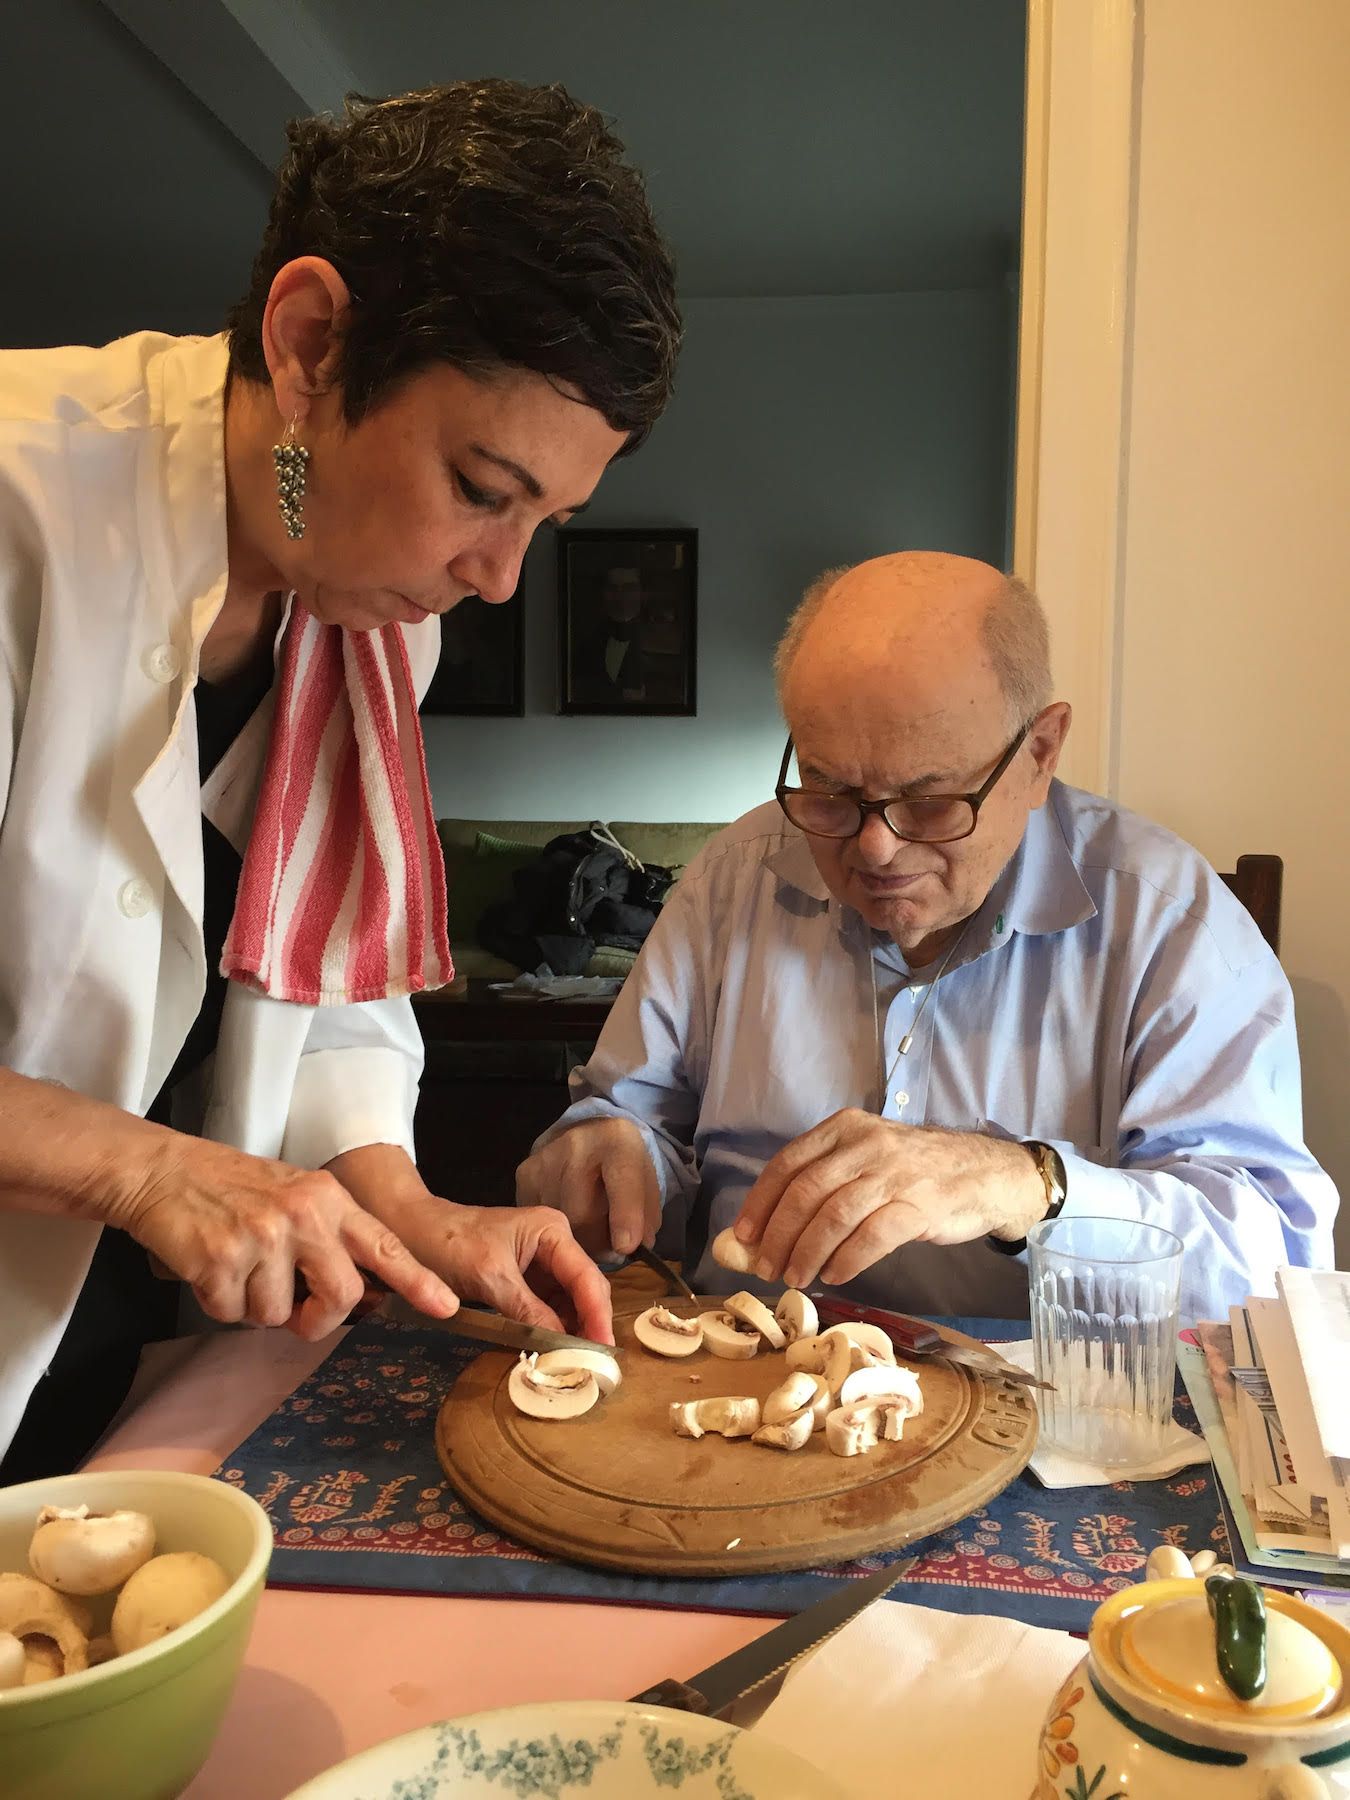 Stephanie Levine, founder of TOHI Wellness, works with Alliance Homecare client Dr. Gad Avigad to prepare an organic lunch.